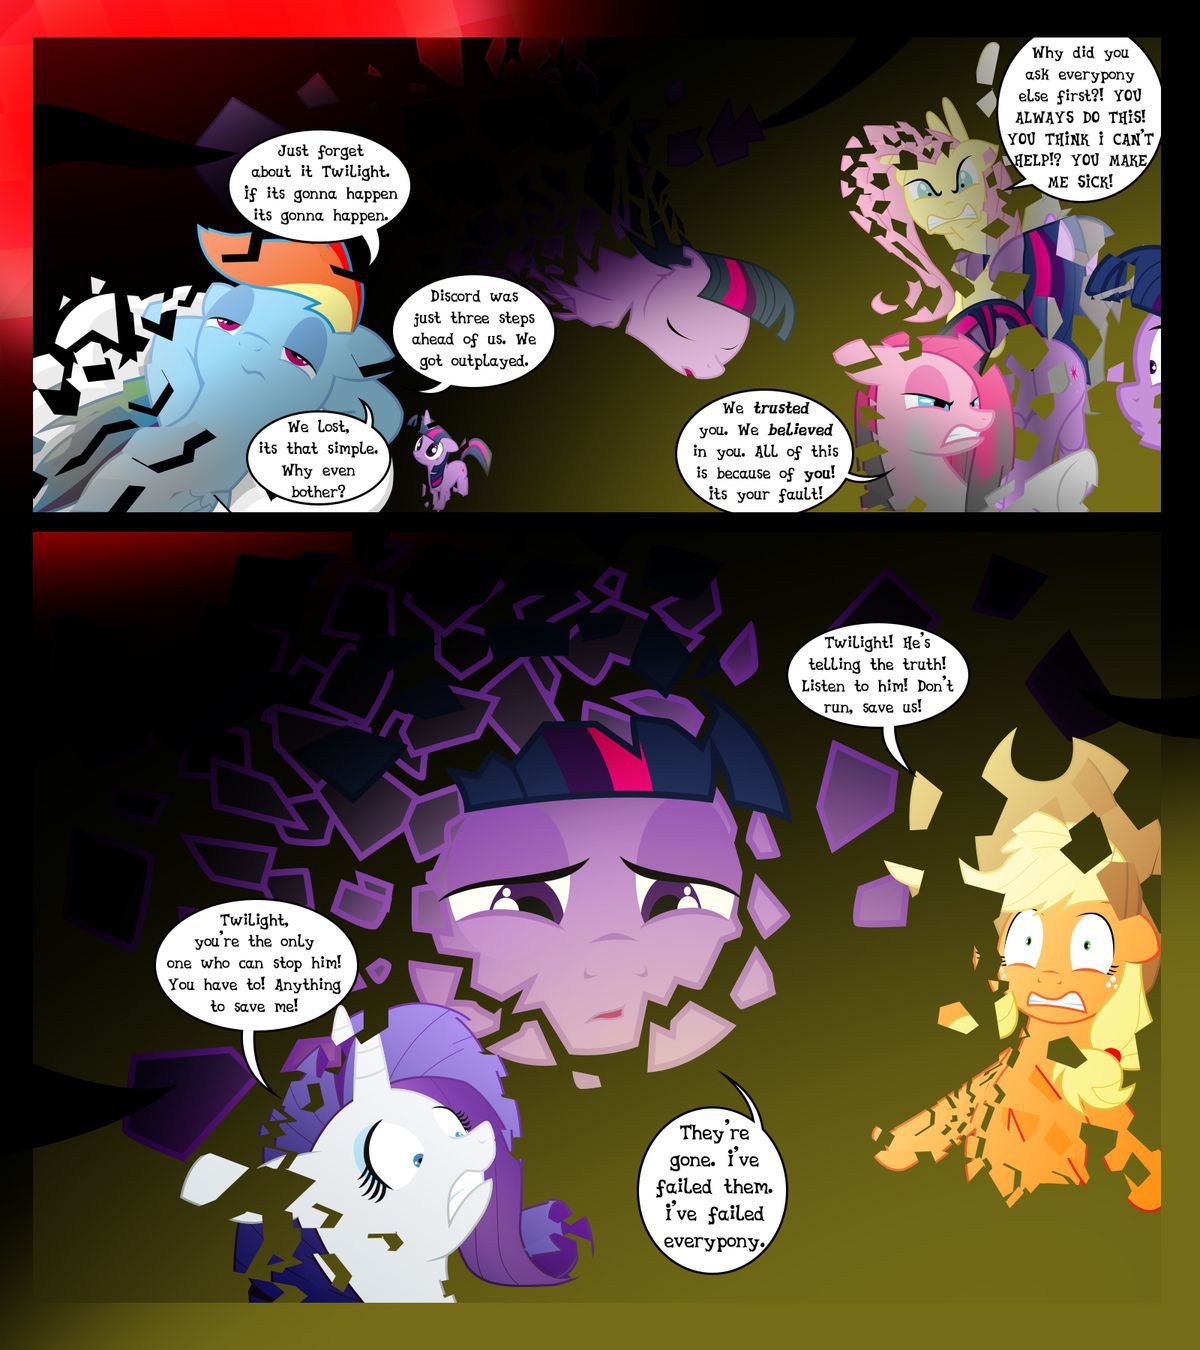 [GatesMcCloud] Cutie Mark Crusaders 10k: Chapter 3 - The Lost (My Little Pony: Friendship is Magic) [English] [Ongoing] 5